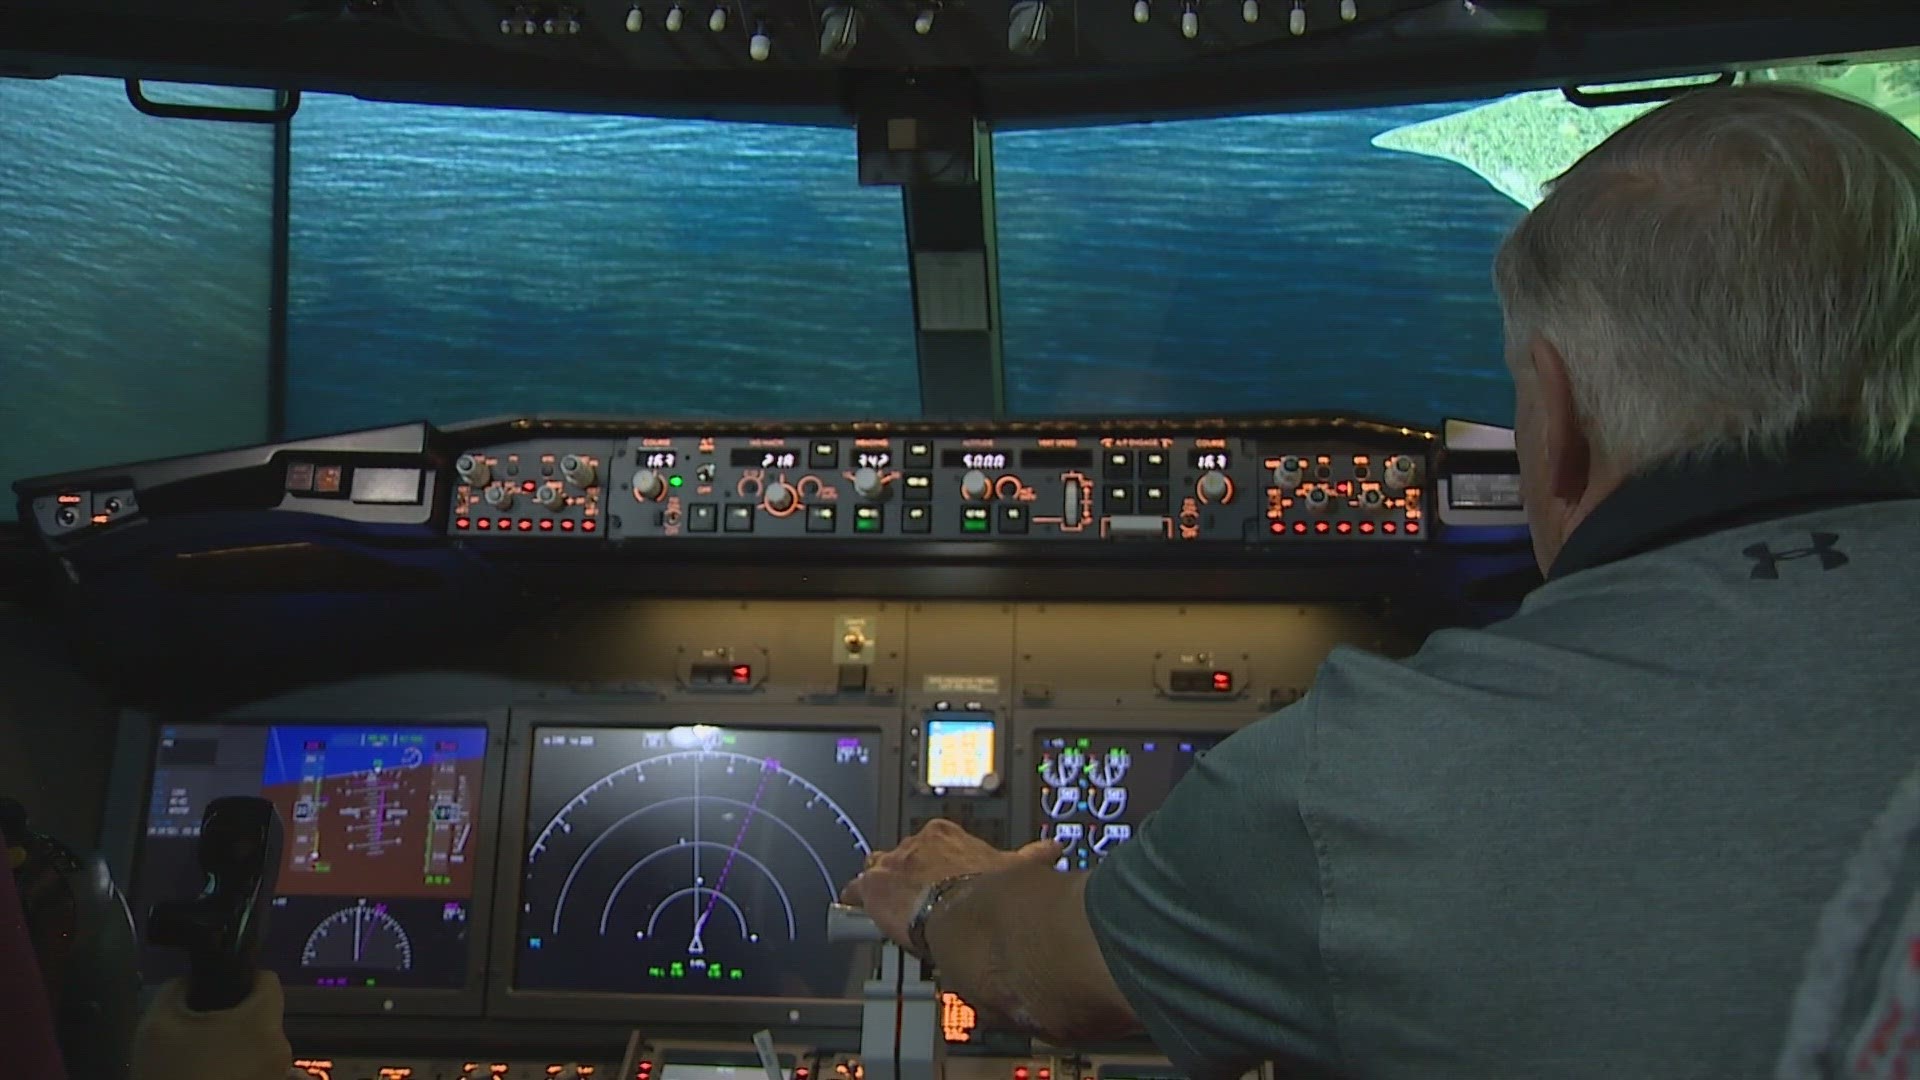 As airlines try to find creative ways to adjust to the pilot shortage, a local business in western Washington is using a new tool to close that gap.